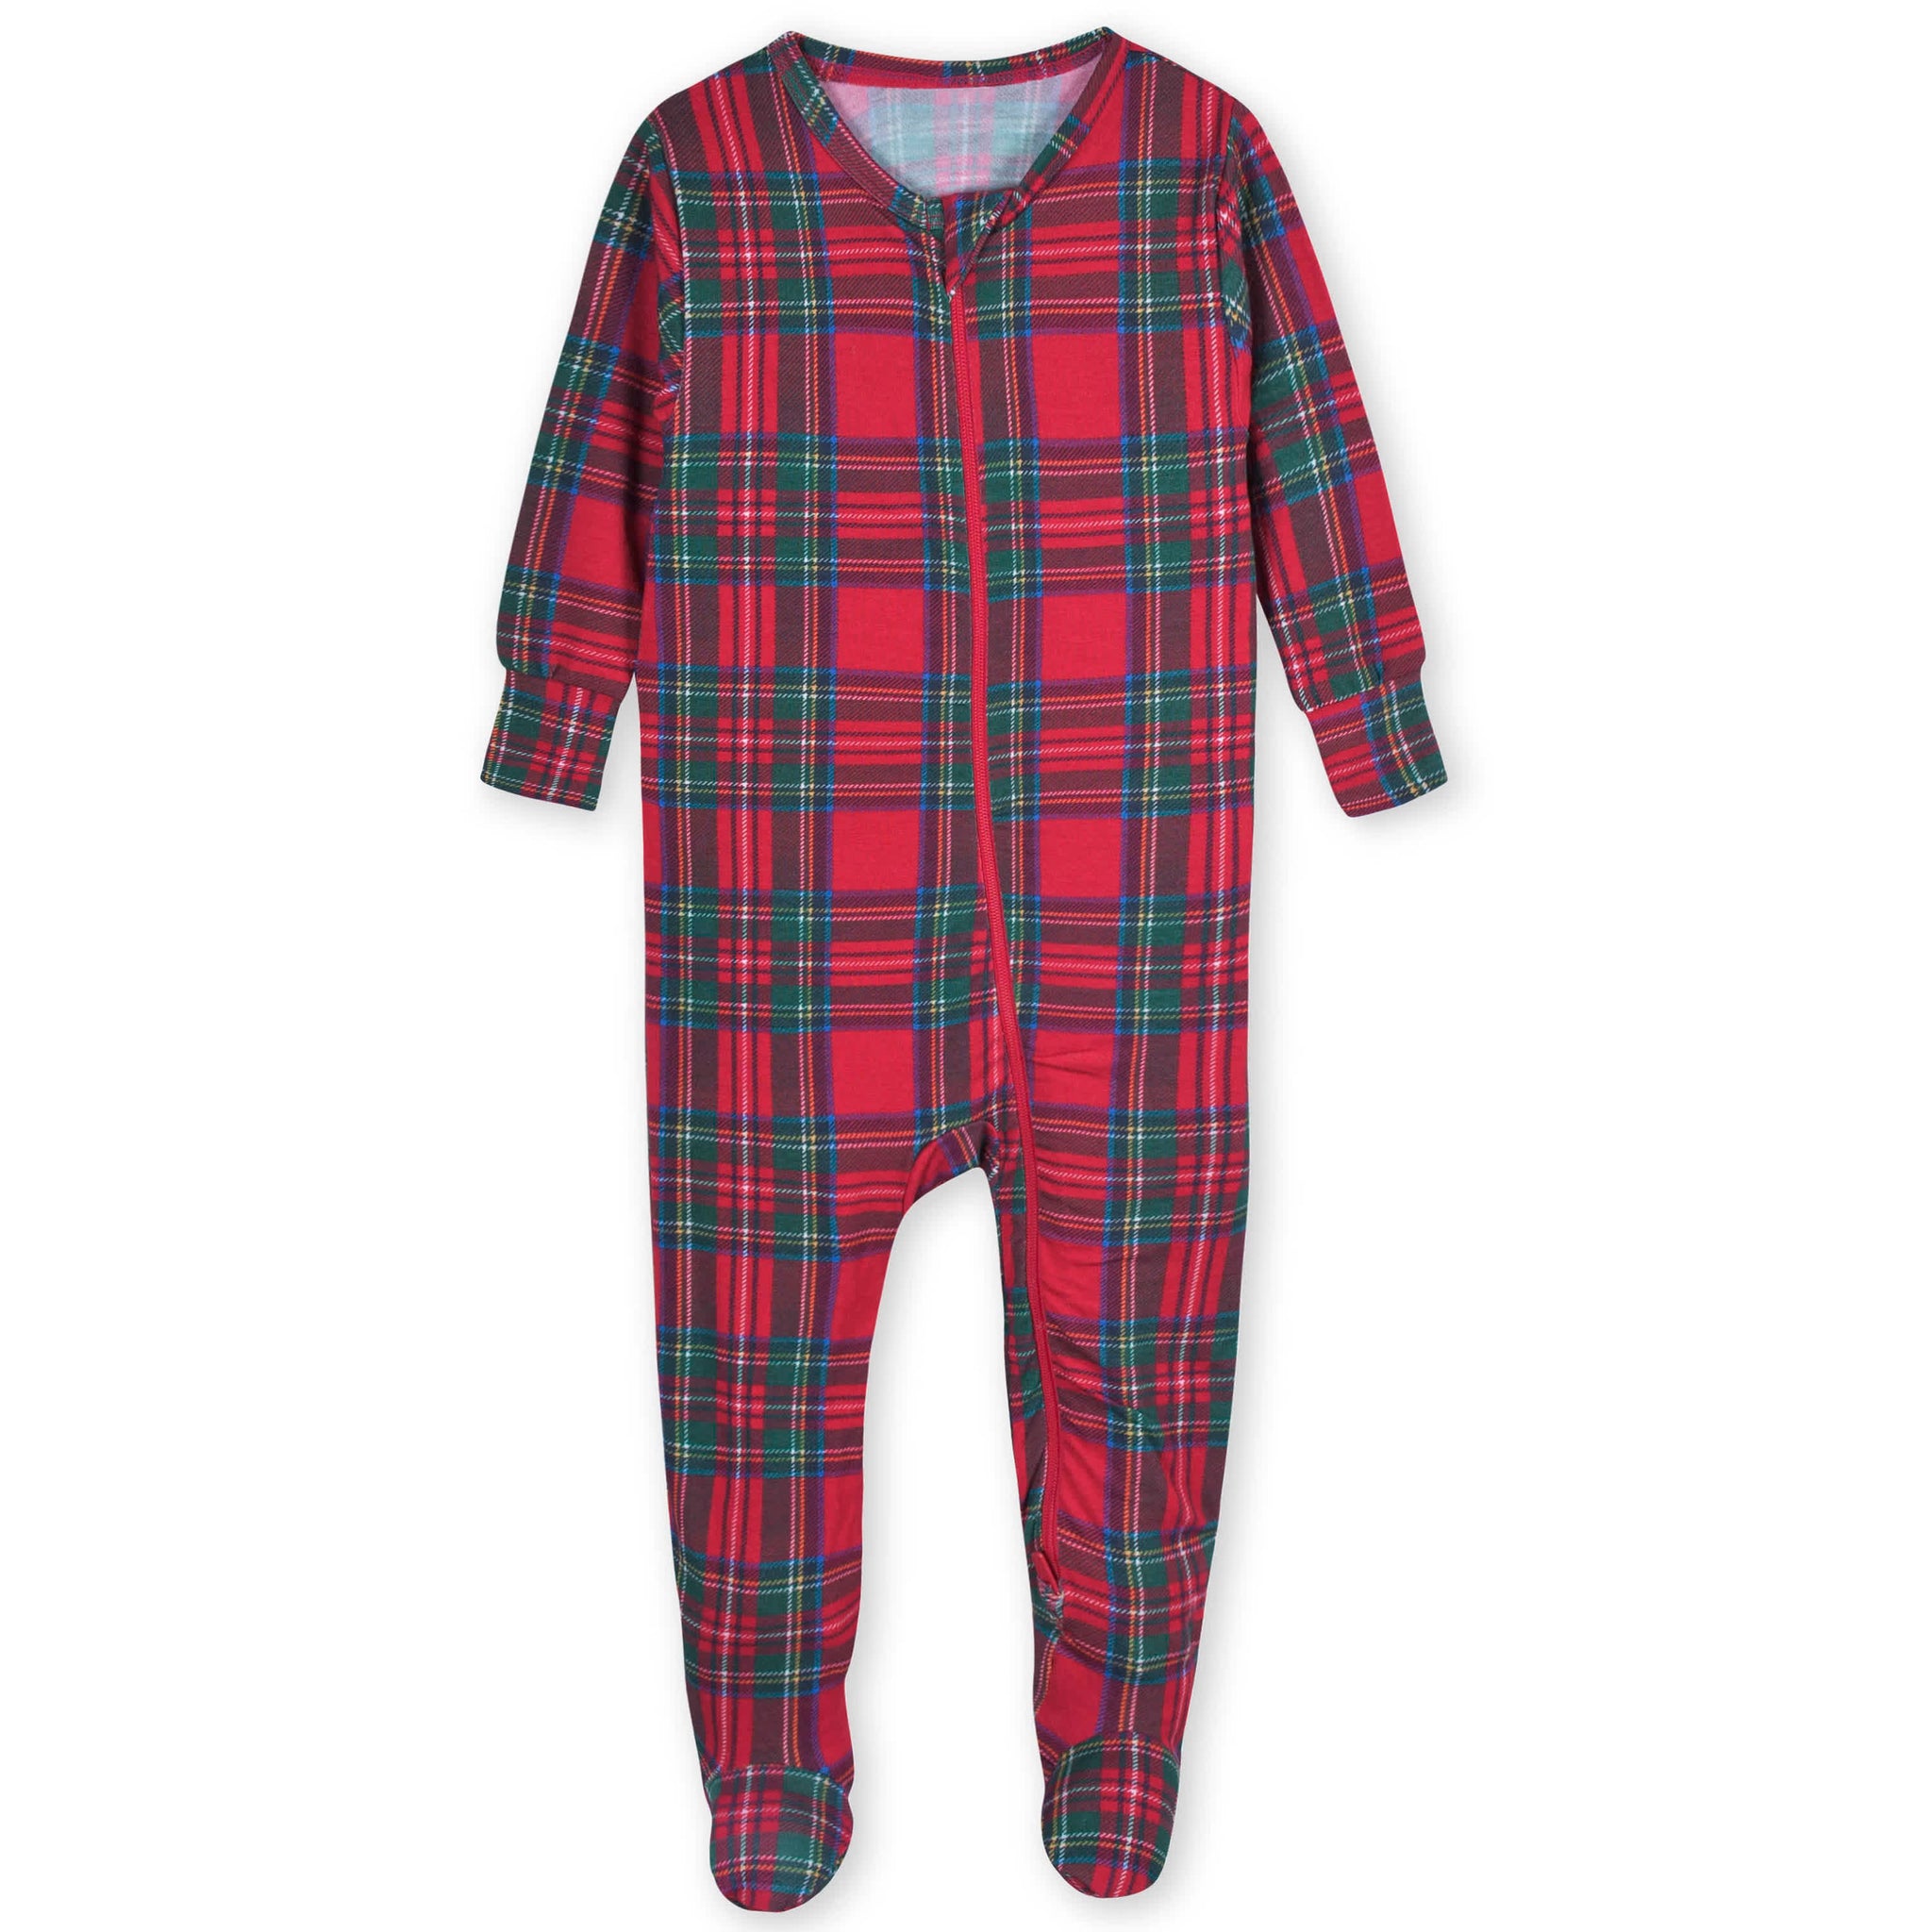 Baby Plaid About You Buttery Soft Viscose Made from Eucalyptus Snug Fit Footed Holiday Pajamas-Gerber Childrenswear Wholesale